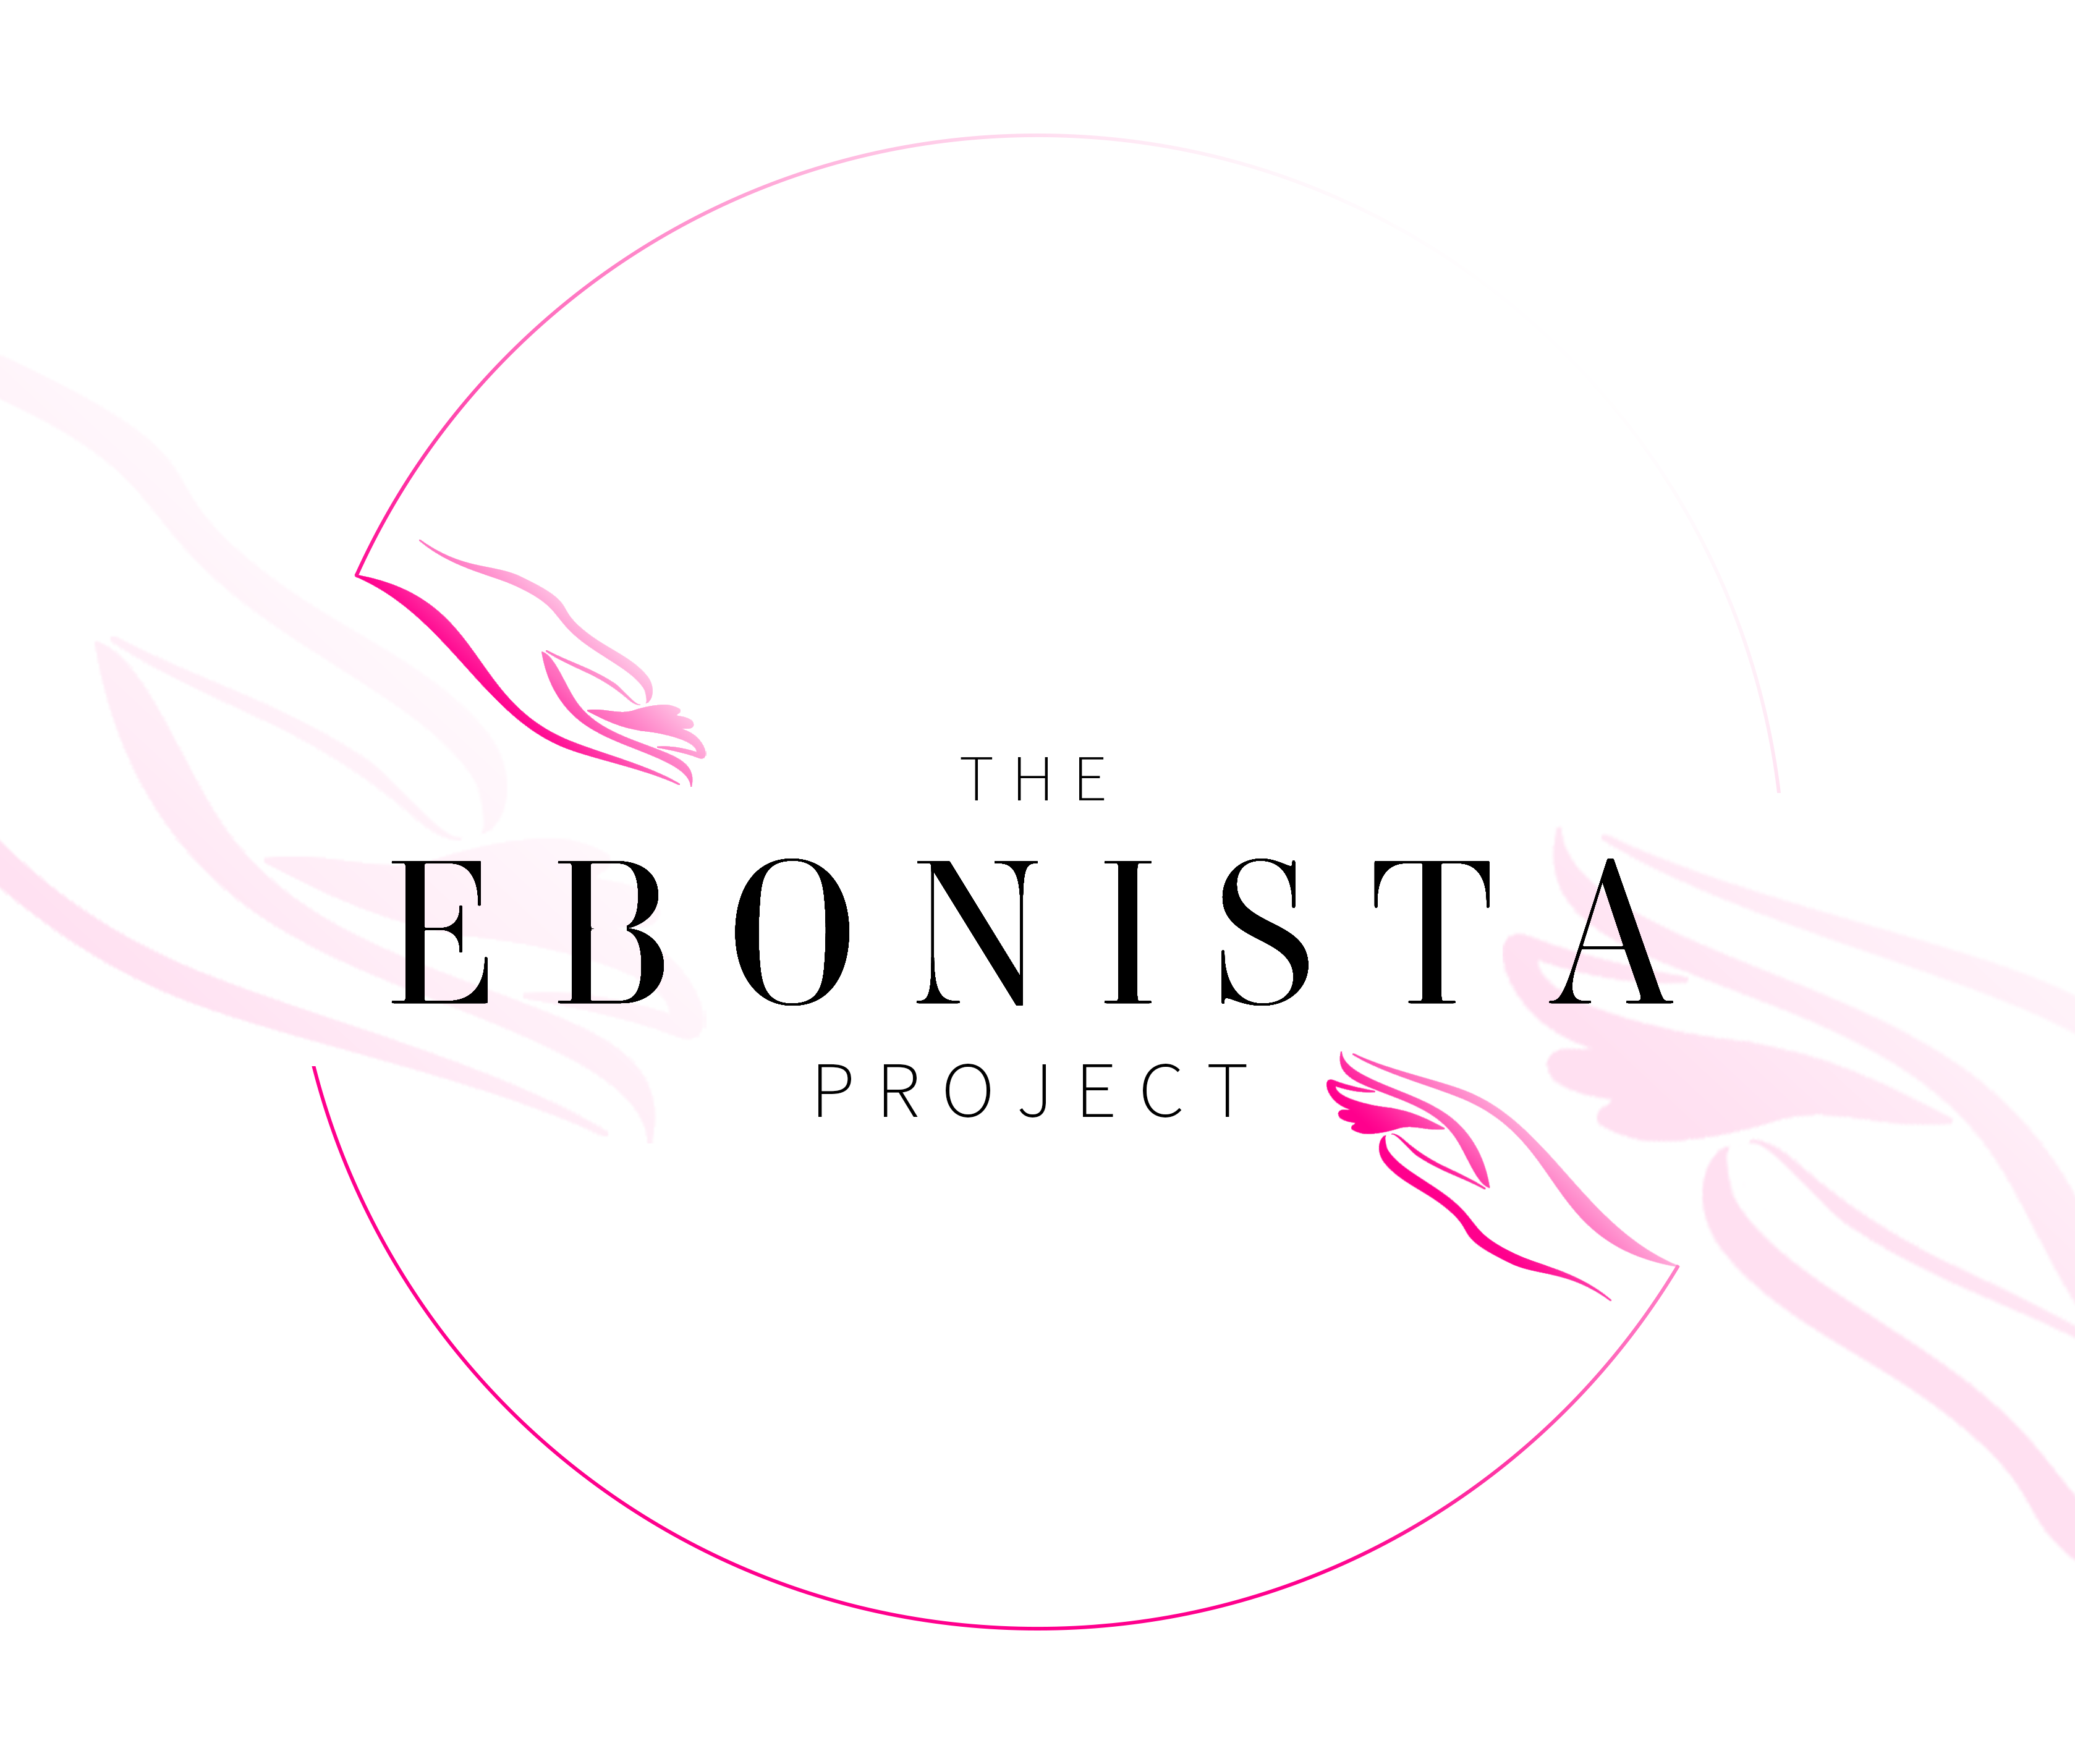 The Ebonista Project